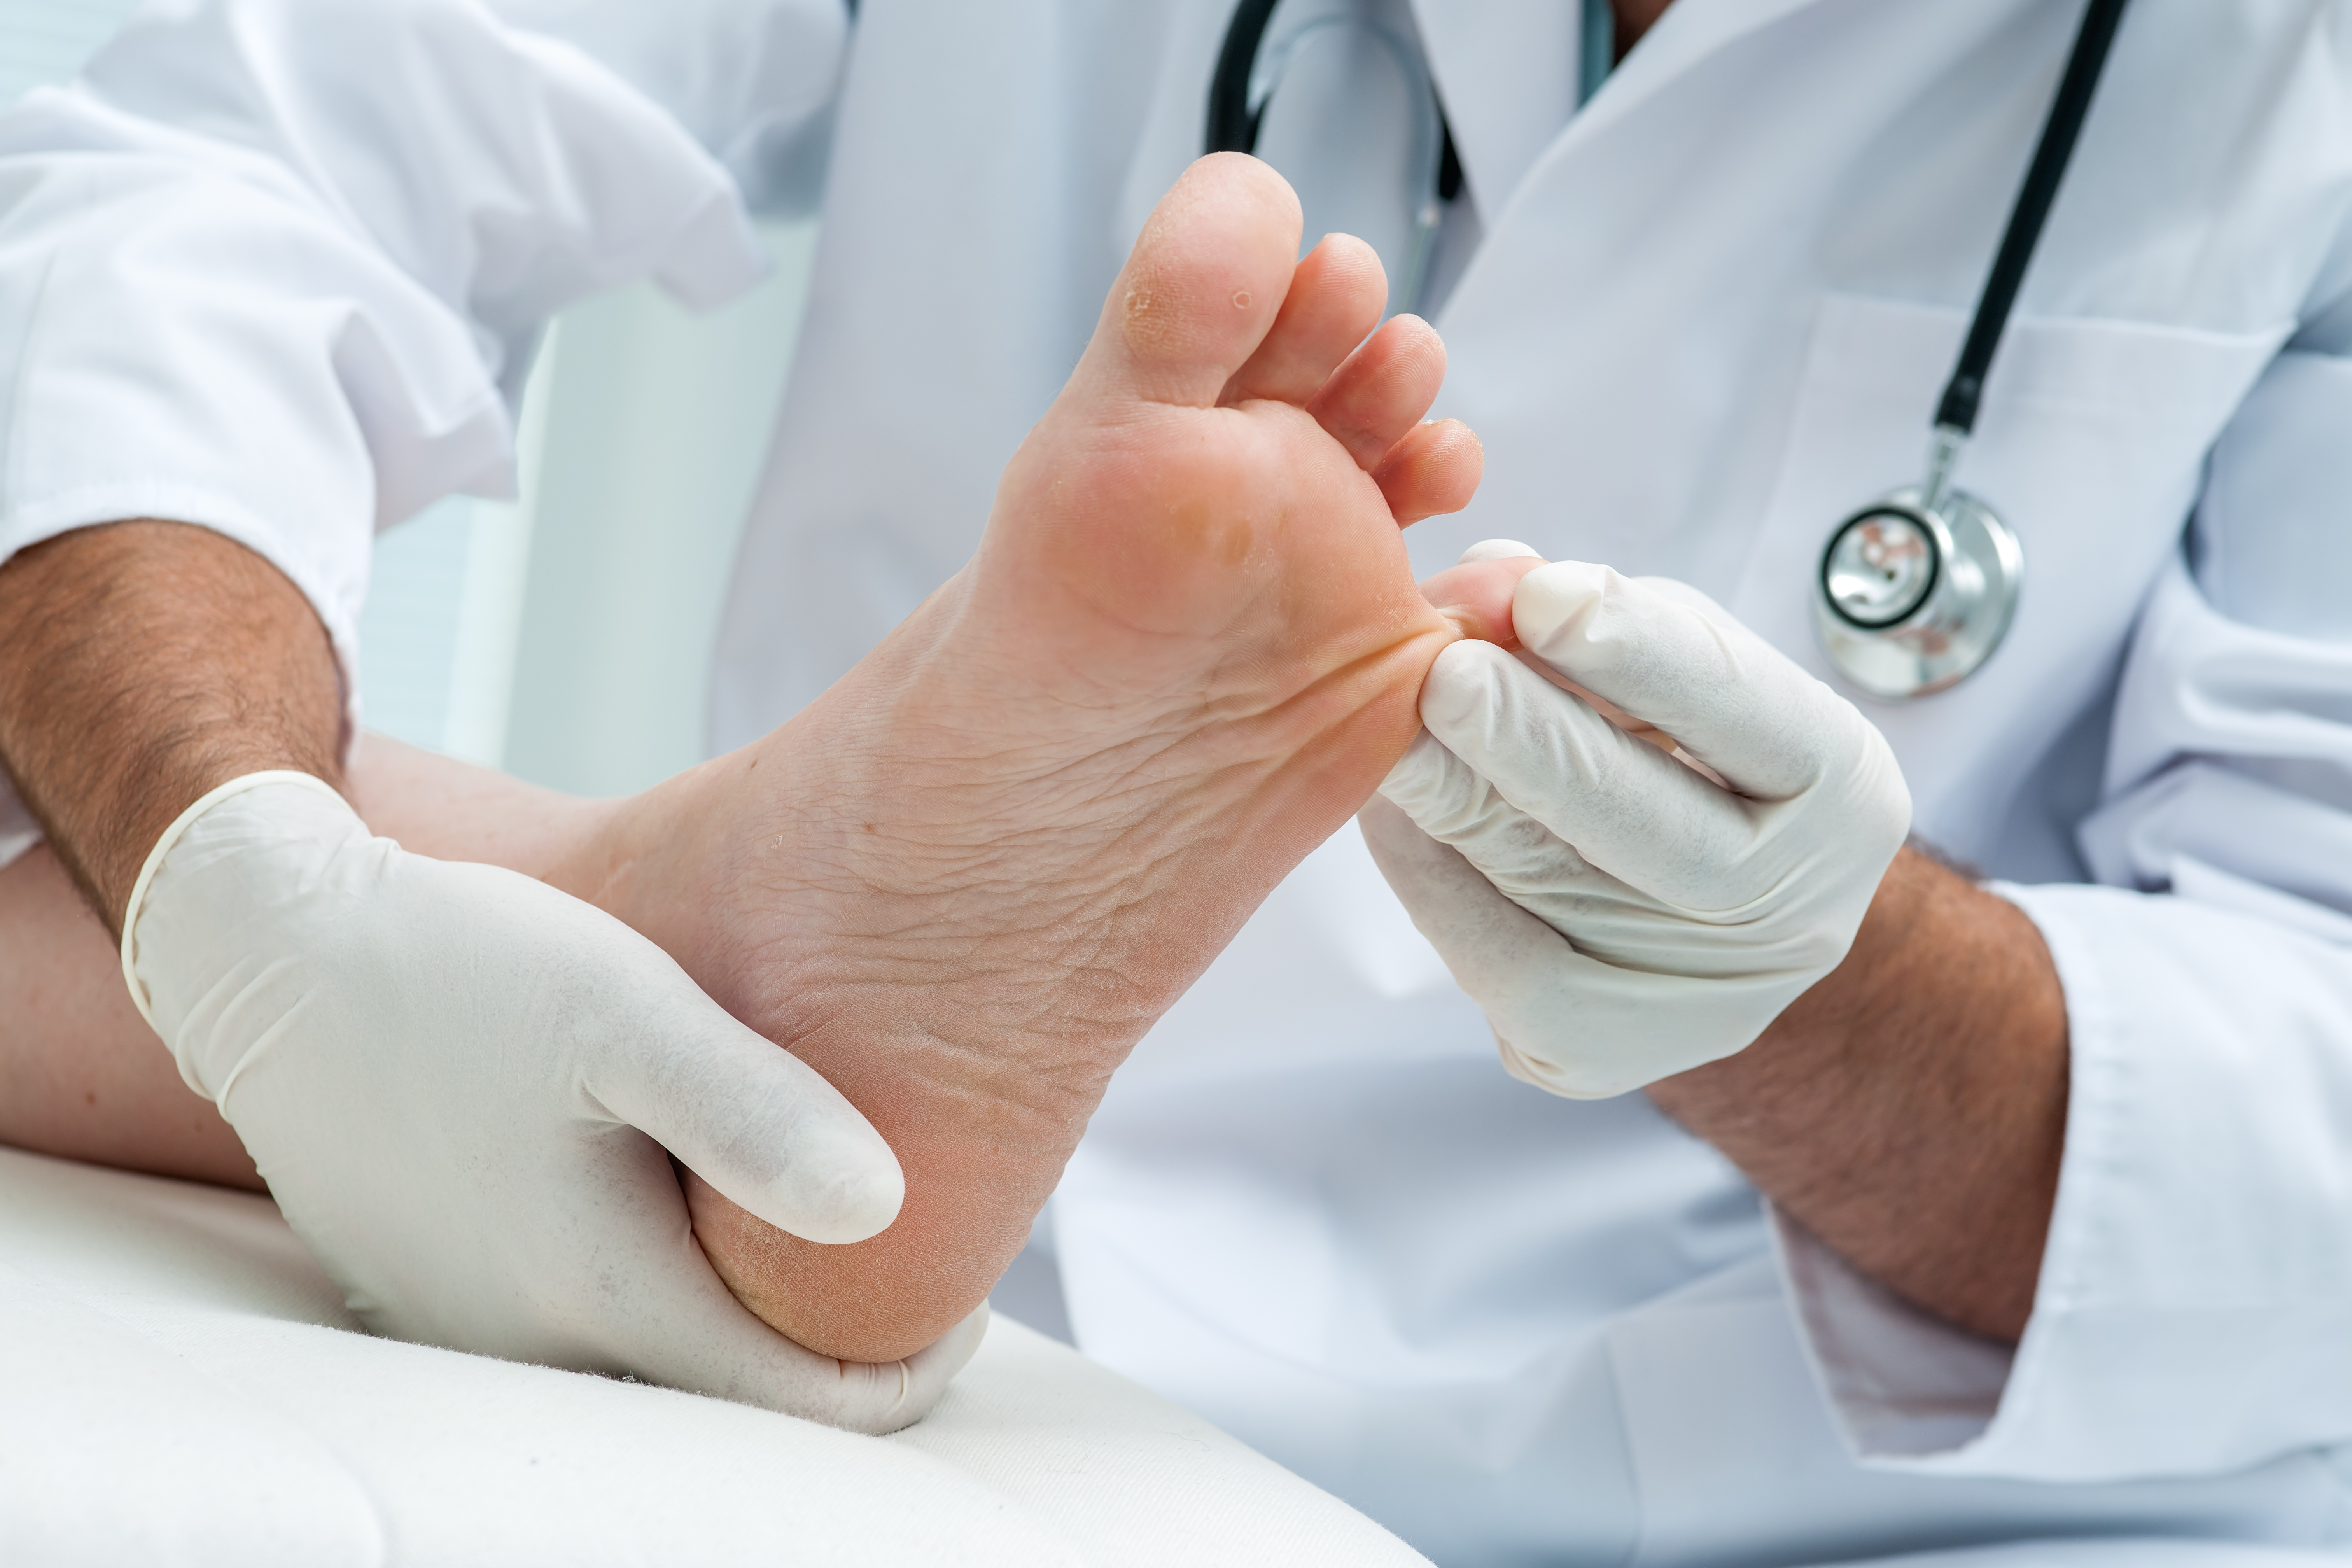 Patient-Friendly “Smart” Mat Identifies Early Signs of Foot Ulcers